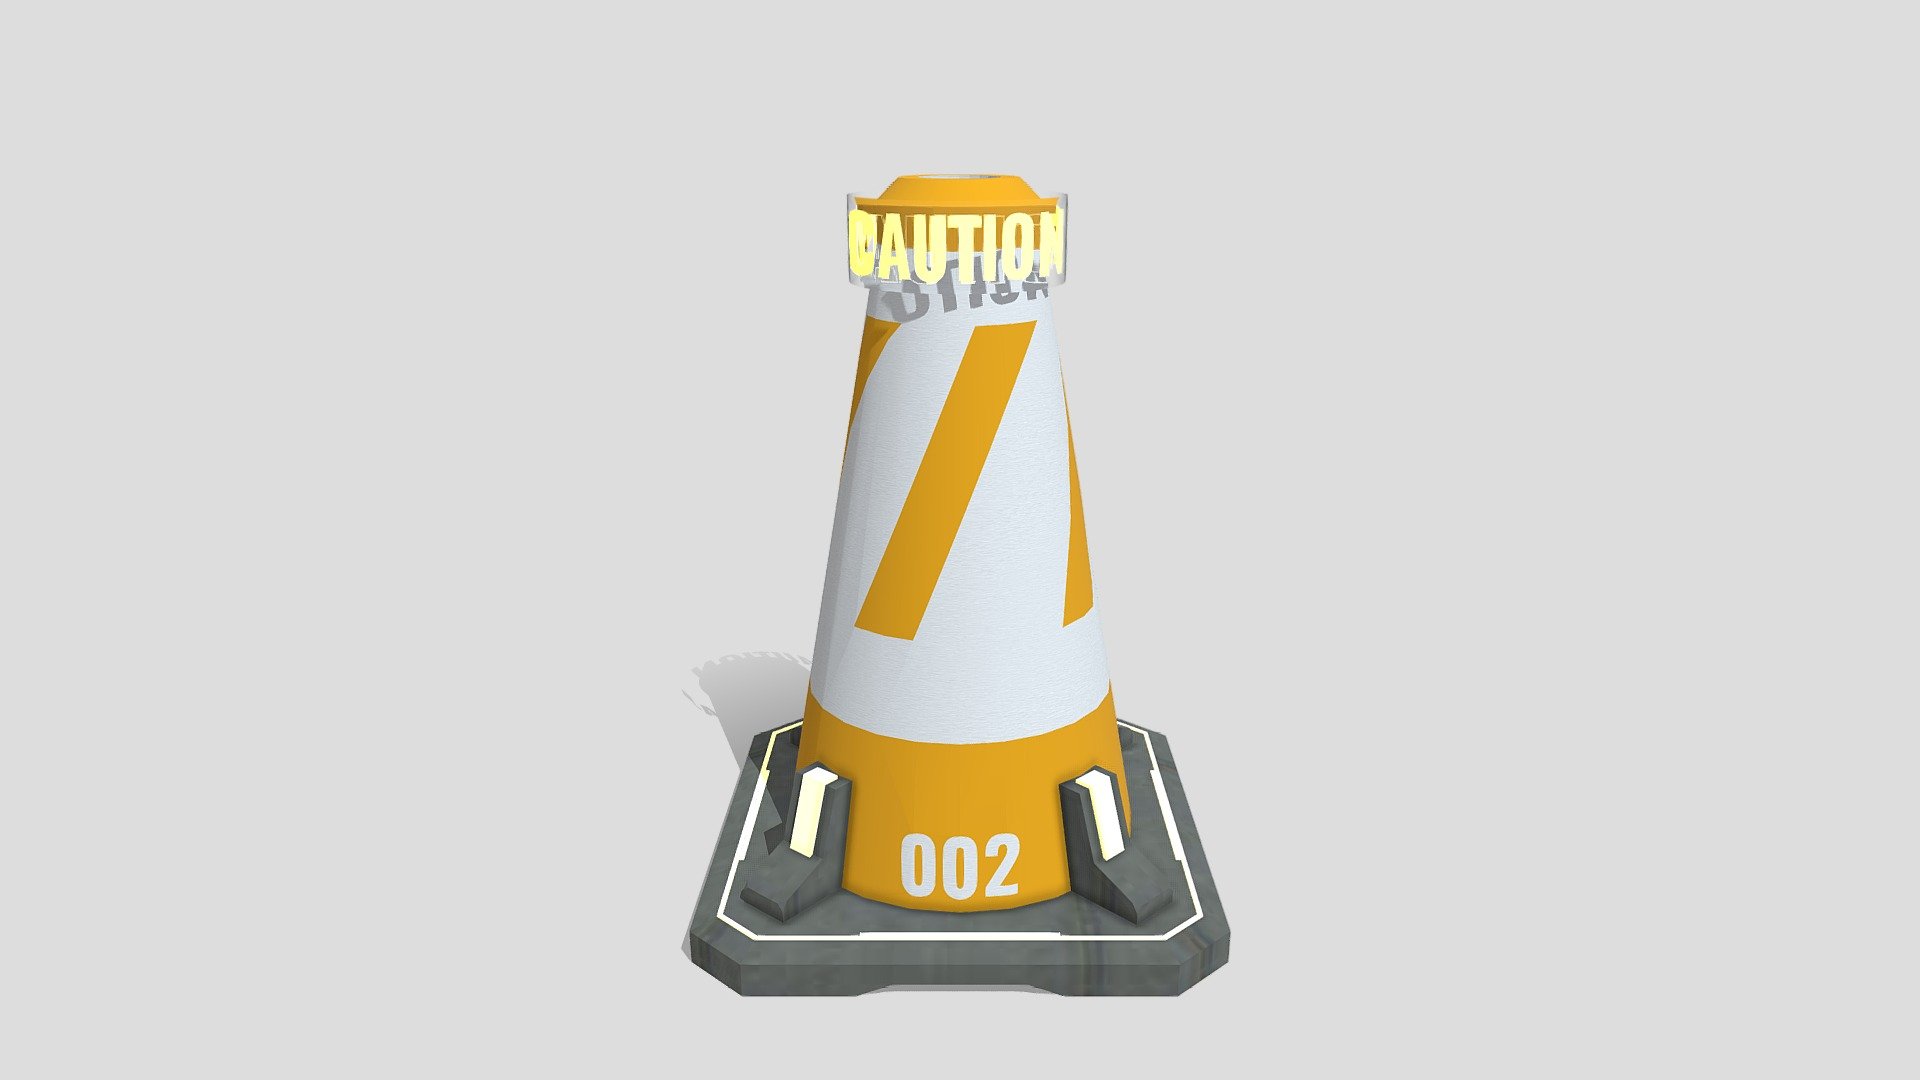 dimension :
0.6m(L) x 0.6m(W) x 0.8m(H)

Safety is number one priority.given in any traffic or construction situation, a traffic cone is been used to redirect the flow of a traffic or to give precaution for others. this 3d model Sci-fi traffic cone 002 is an addition to the Sci-fi 002 series. the model created in sketchup 2021 and rendered using enscape version 3.1. this 3d model is more likely inspired by a sci-fi futuristic themed which can fit with a cyberpunk/space/futuristic environment. it is well suitable with the other Sci-fi 002 collection.

the model can be use as prop, backdrop or anything that suits the futuristic environment as long as it fits with your needs!

*render is for illustration purpose only and the outcome may vary depending on the rendering engine , materials being use and lighting 3d model